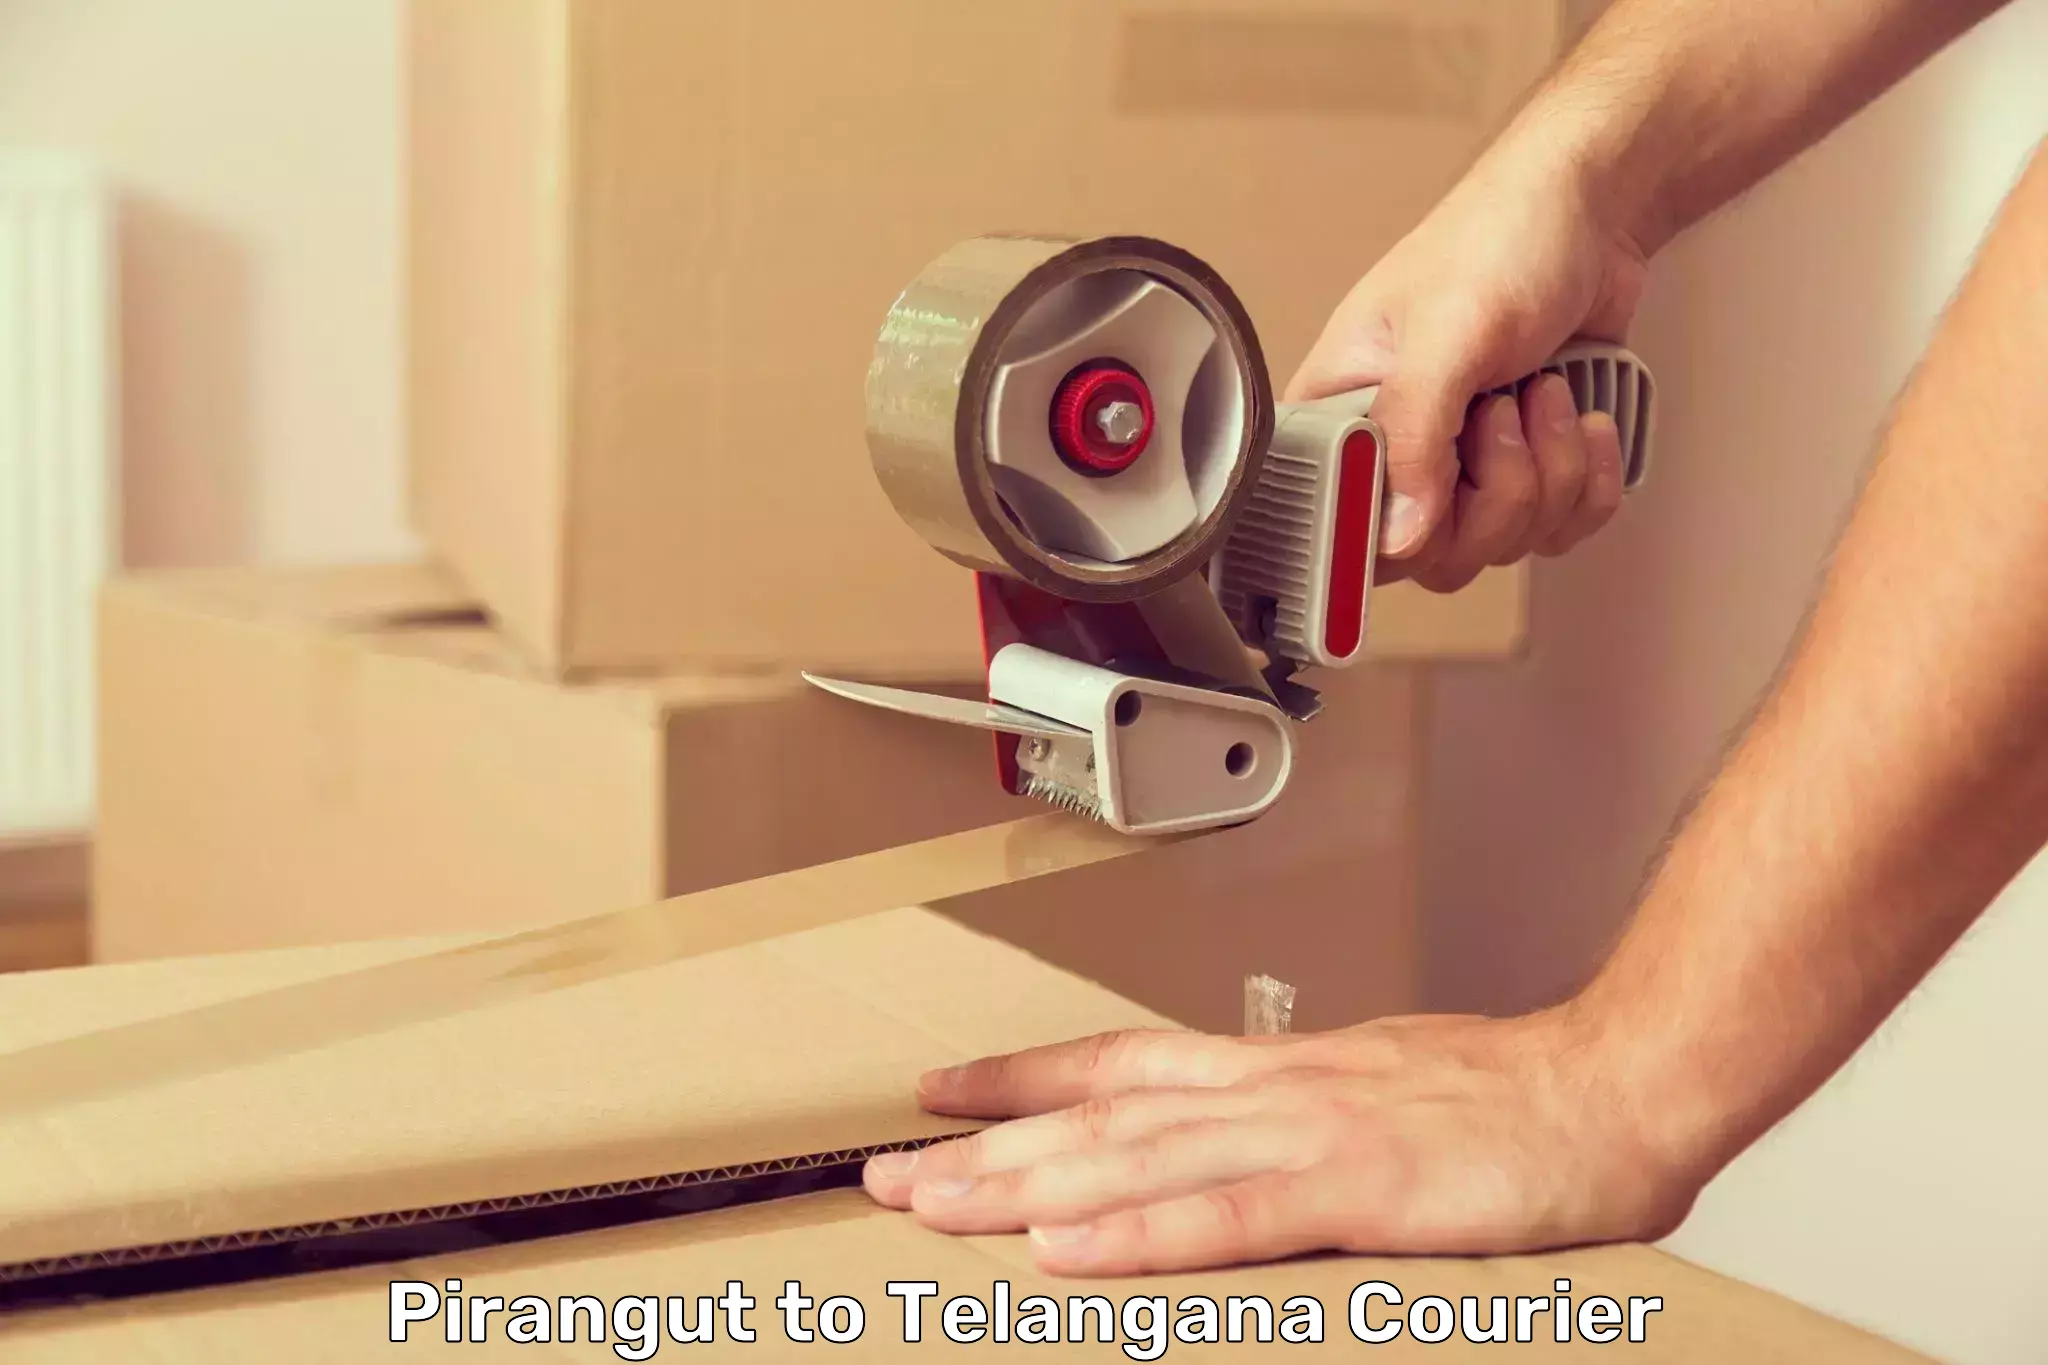 Courier service efficiency in Pirangut to Telangana